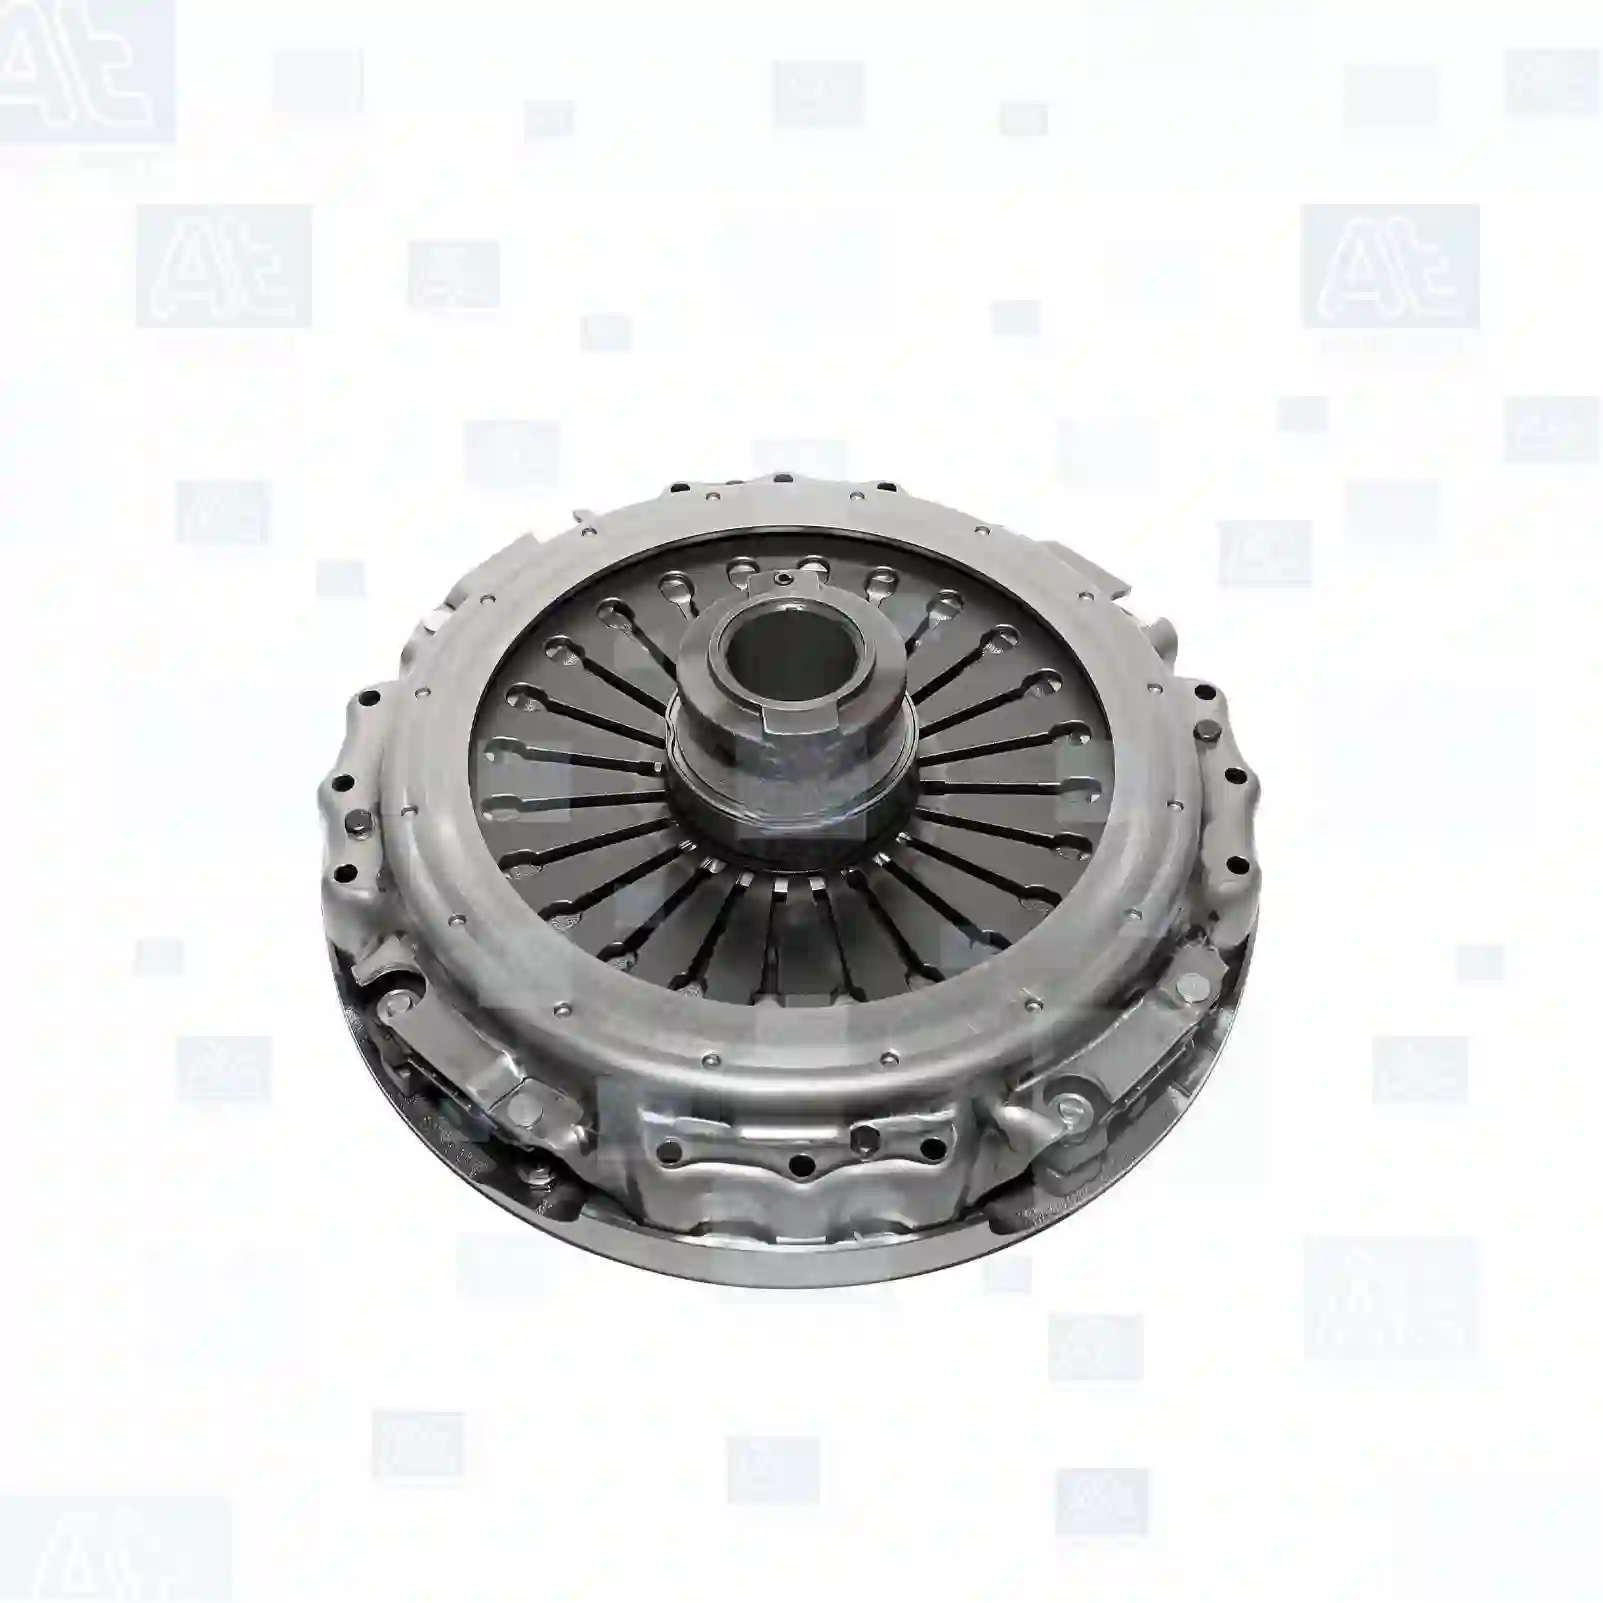 Clutch cover, with release bearing, 77722441, 0062504704, 0062504804, 0062504904, 0062507404, 0062508604, 0062508704, 0062508804, 0072502804, 0072502904, 0072503004, 0072503204, 0072503304, 0072503404, 0072503504, 0072504404, 0072504704, 0072505104, 007250510480, 0072508204, 0082501004, 0082501304, 0082501904, 0082503504, 0082503604, 0082503804, 0082503904, 0082504204, 0092500504, 0092501204, 0092501404, 0092501504, 0092501604, 0092502304, 0092502504, 0092508504, 0102501304, 0102501504, 0102501704, 0192501304 ||  77722441 At Spare Part | Engine, Accelerator Pedal, Camshaft, Connecting Rod, Crankcase, Crankshaft, Cylinder Head, Engine Suspension Mountings, Exhaust Manifold, Exhaust Gas Recirculation, Filter Kits, Flywheel Housing, General Overhaul Kits, Engine, Intake Manifold, Oil Cleaner, Oil Cooler, Oil Filter, Oil Pump, Oil Sump, Piston & Liner, Sensor & Switch, Timing Case, Turbocharger, Cooling System, Belt Tensioner, Coolant Filter, Coolant Pipe, Corrosion Prevention Agent, Drive, Expansion Tank, Fan, Intercooler, Monitors & Gauges, Radiator, Thermostat, V-Belt / Timing belt, Water Pump, Fuel System, Electronical Injector Unit, Feed Pump, Fuel Filter, cpl., Fuel Gauge Sender,  Fuel Line, Fuel Pump, Fuel Tank, Injection Line Kit, Injection Pump, Exhaust System, Clutch & Pedal, Gearbox, Propeller Shaft, Axles, Brake System, Hubs & Wheels, Suspension, Leaf Spring, Universal Parts / Accessories, Steering, Electrical System, Cabin Clutch cover, with release bearing, 77722441, 0062504704, 0062504804, 0062504904, 0062507404, 0062508604, 0062508704, 0062508804, 0072502804, 0072502904, 0072503004, 0072503204, 0072503304, 0072503404, 0072503504, 0072504404, 0072504704, 0072505104, 007250510480, 0072508204, 0082501004, 0082501304, 0082501904, 0082503504, 0082503604, 0082503804, 0082503904, 0082504204, 0092500504, 0092501204, 0092501404, 0092501504, 0092501604, 0092502304, 0092502504, 0092508504, 0102501304, 0102501504, 0102501704, 0192501304 ||  77722441 At Spare Part | Engine, Accelerator Pedal, Camshaft, Connecting Rod, Crankcase, Crankshaft, Cylinder Head, Engine Suspension Mountings, Exhaust Manifold, Exhaust Gas Recirculation, Filter Kits, Flywheel Housing, General Overhaul Kits, Engine, Intake Manifold, Oil Cleaner, Oil Cooler, Oil Filter, Oil Pump, Oil Sump, Piston & Liner, Sensor & Switch, Timing Case, Turbocharger, Cooling System, Belt Tensioner, Coolant Filter, Coolant Pipe, Corrosion Prevention Agent, Drive, Expansion Tank, Fan, Intercooler, Monitors & Gauges, Radiator, Thermostat, V-Belt / Timing belt, Water Pump, Fuel System, Electronical Injector Unit, Feed Pump, Fuel Filter, cpl., Fuel Gauge Sender,  Fuel Line, Fuel Pump, Fuel Tank, Injection Line Kit, Injection Pump, Exhaust System, Clutch & Pedal, Gearbox, Propeller Shaft, Axles, Brake System, Hubs & Wheels, Suspension, Leaf Spring, Universal Parts / Accessories, Steering, Electrical System, Cabin